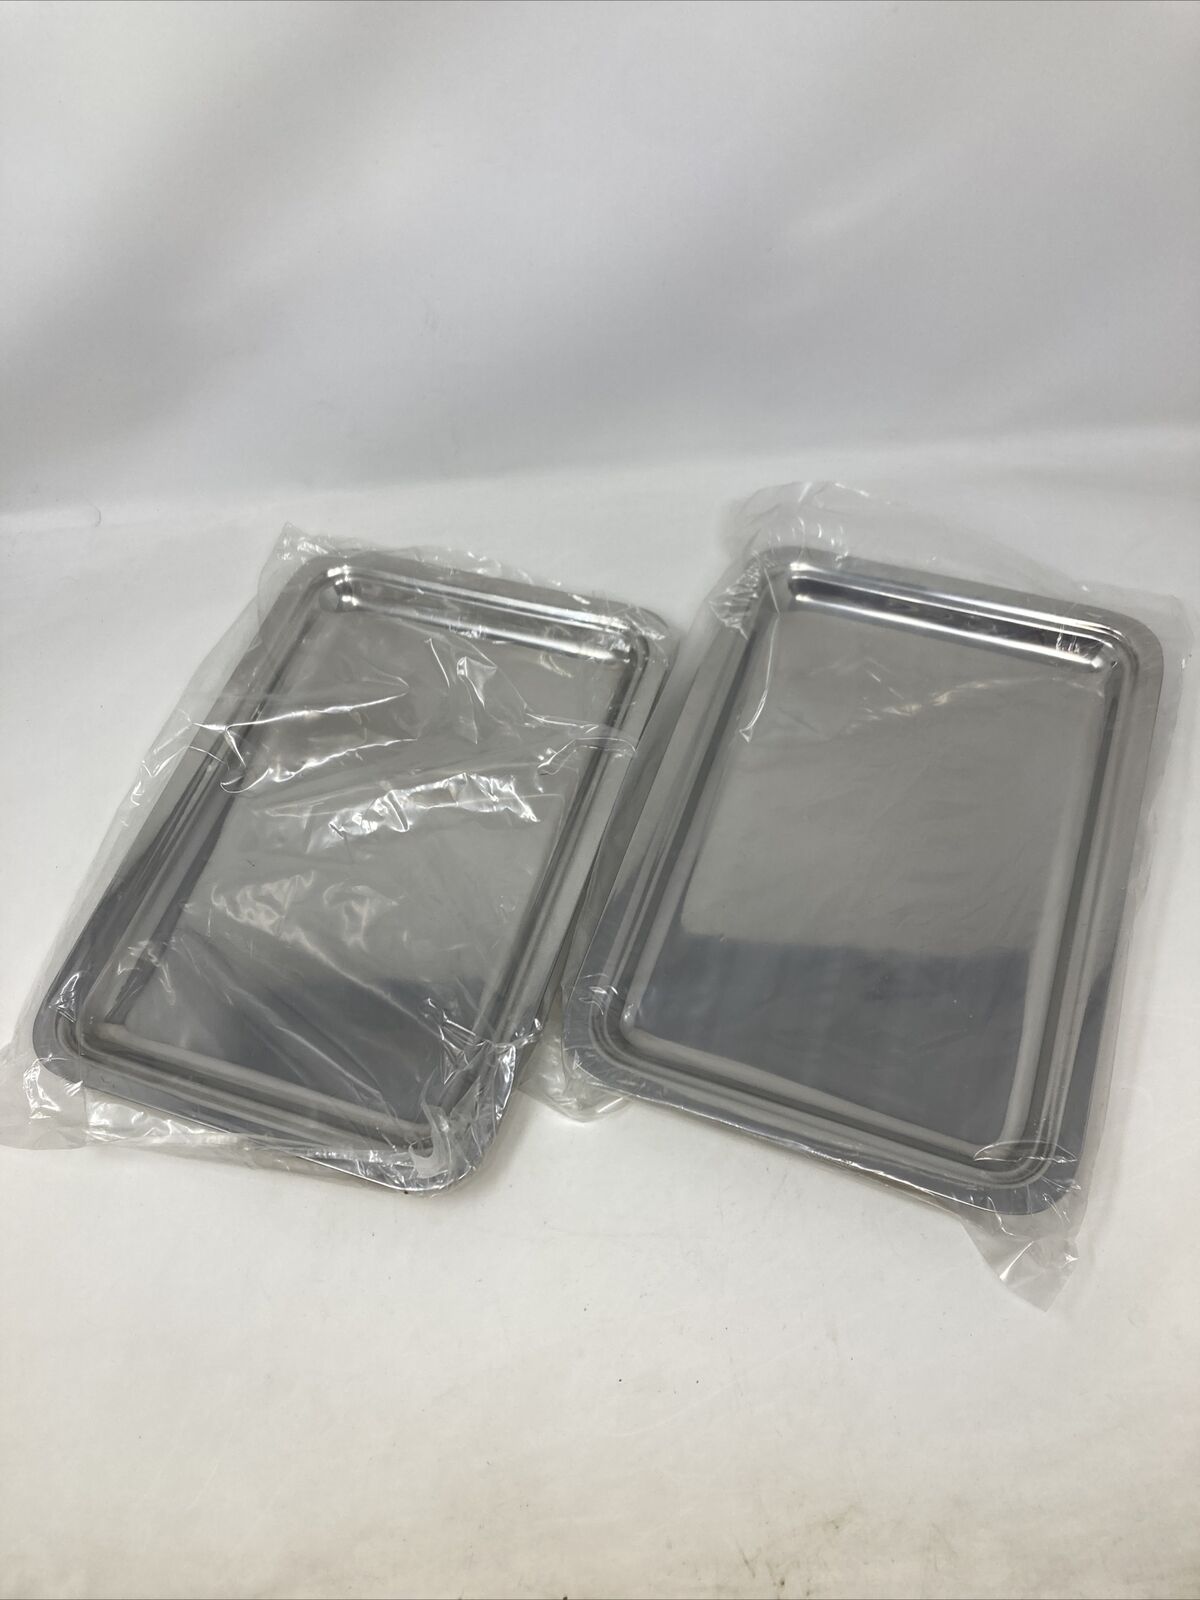 Delta Airlines small 2-pack rectangular 12x8 stainless steel serving trays new